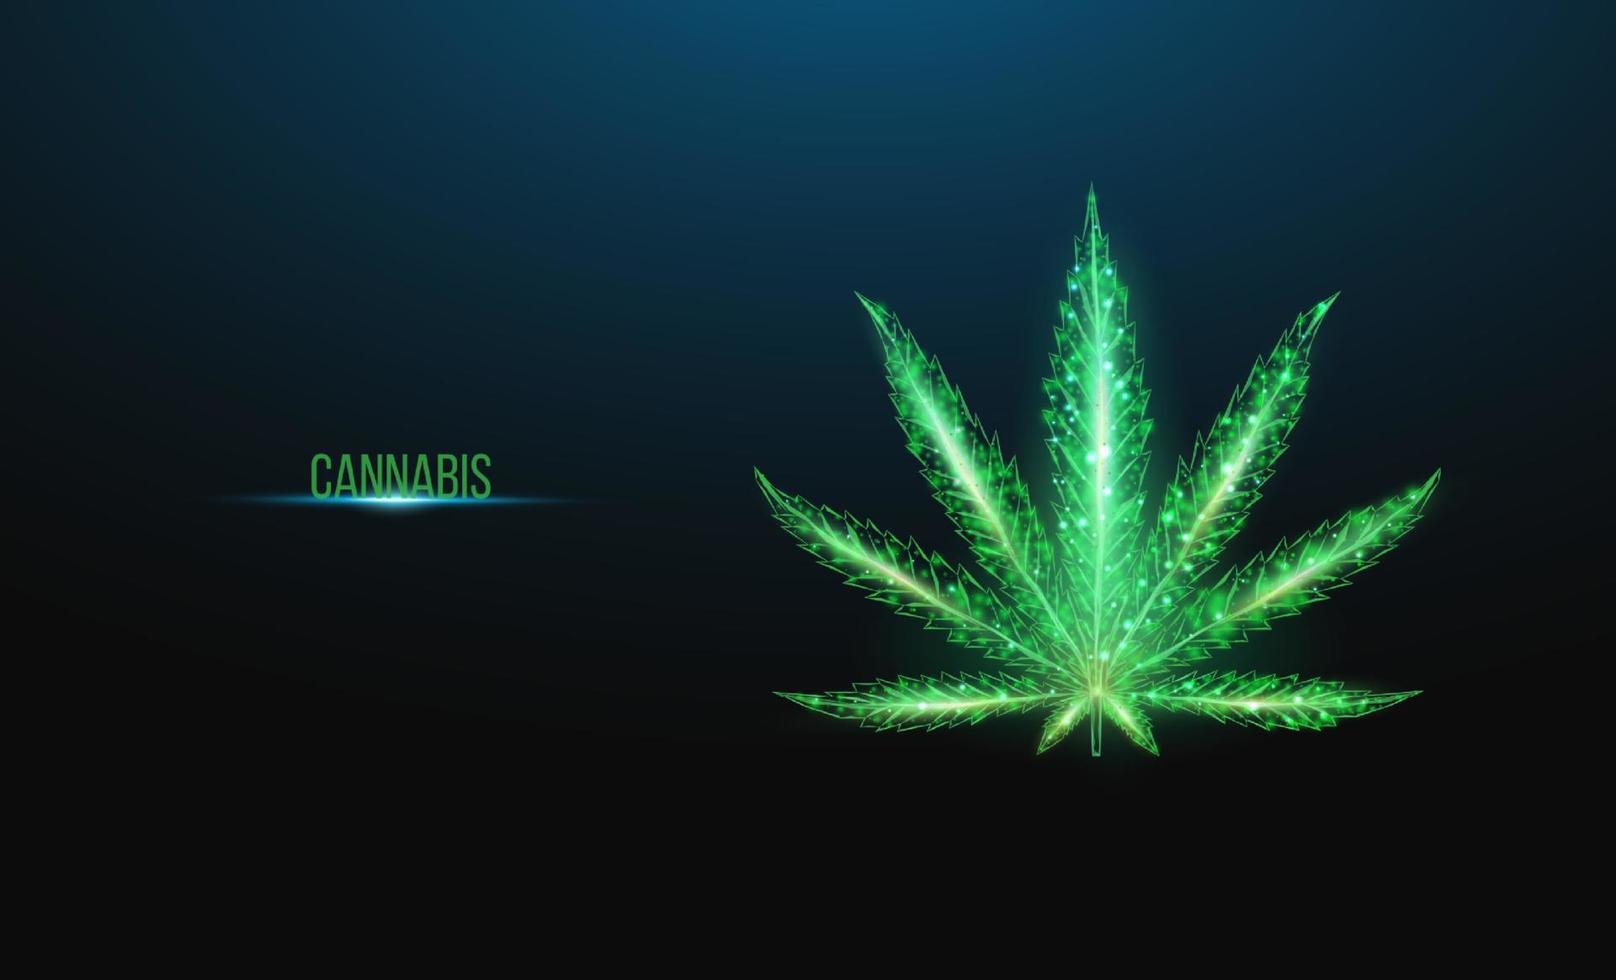 Cannabis leaf. Low poly wireframe style. The concept of medical use of marijuana, alternative treatment. Abstract modern 3d vector illustration on dark blue background.